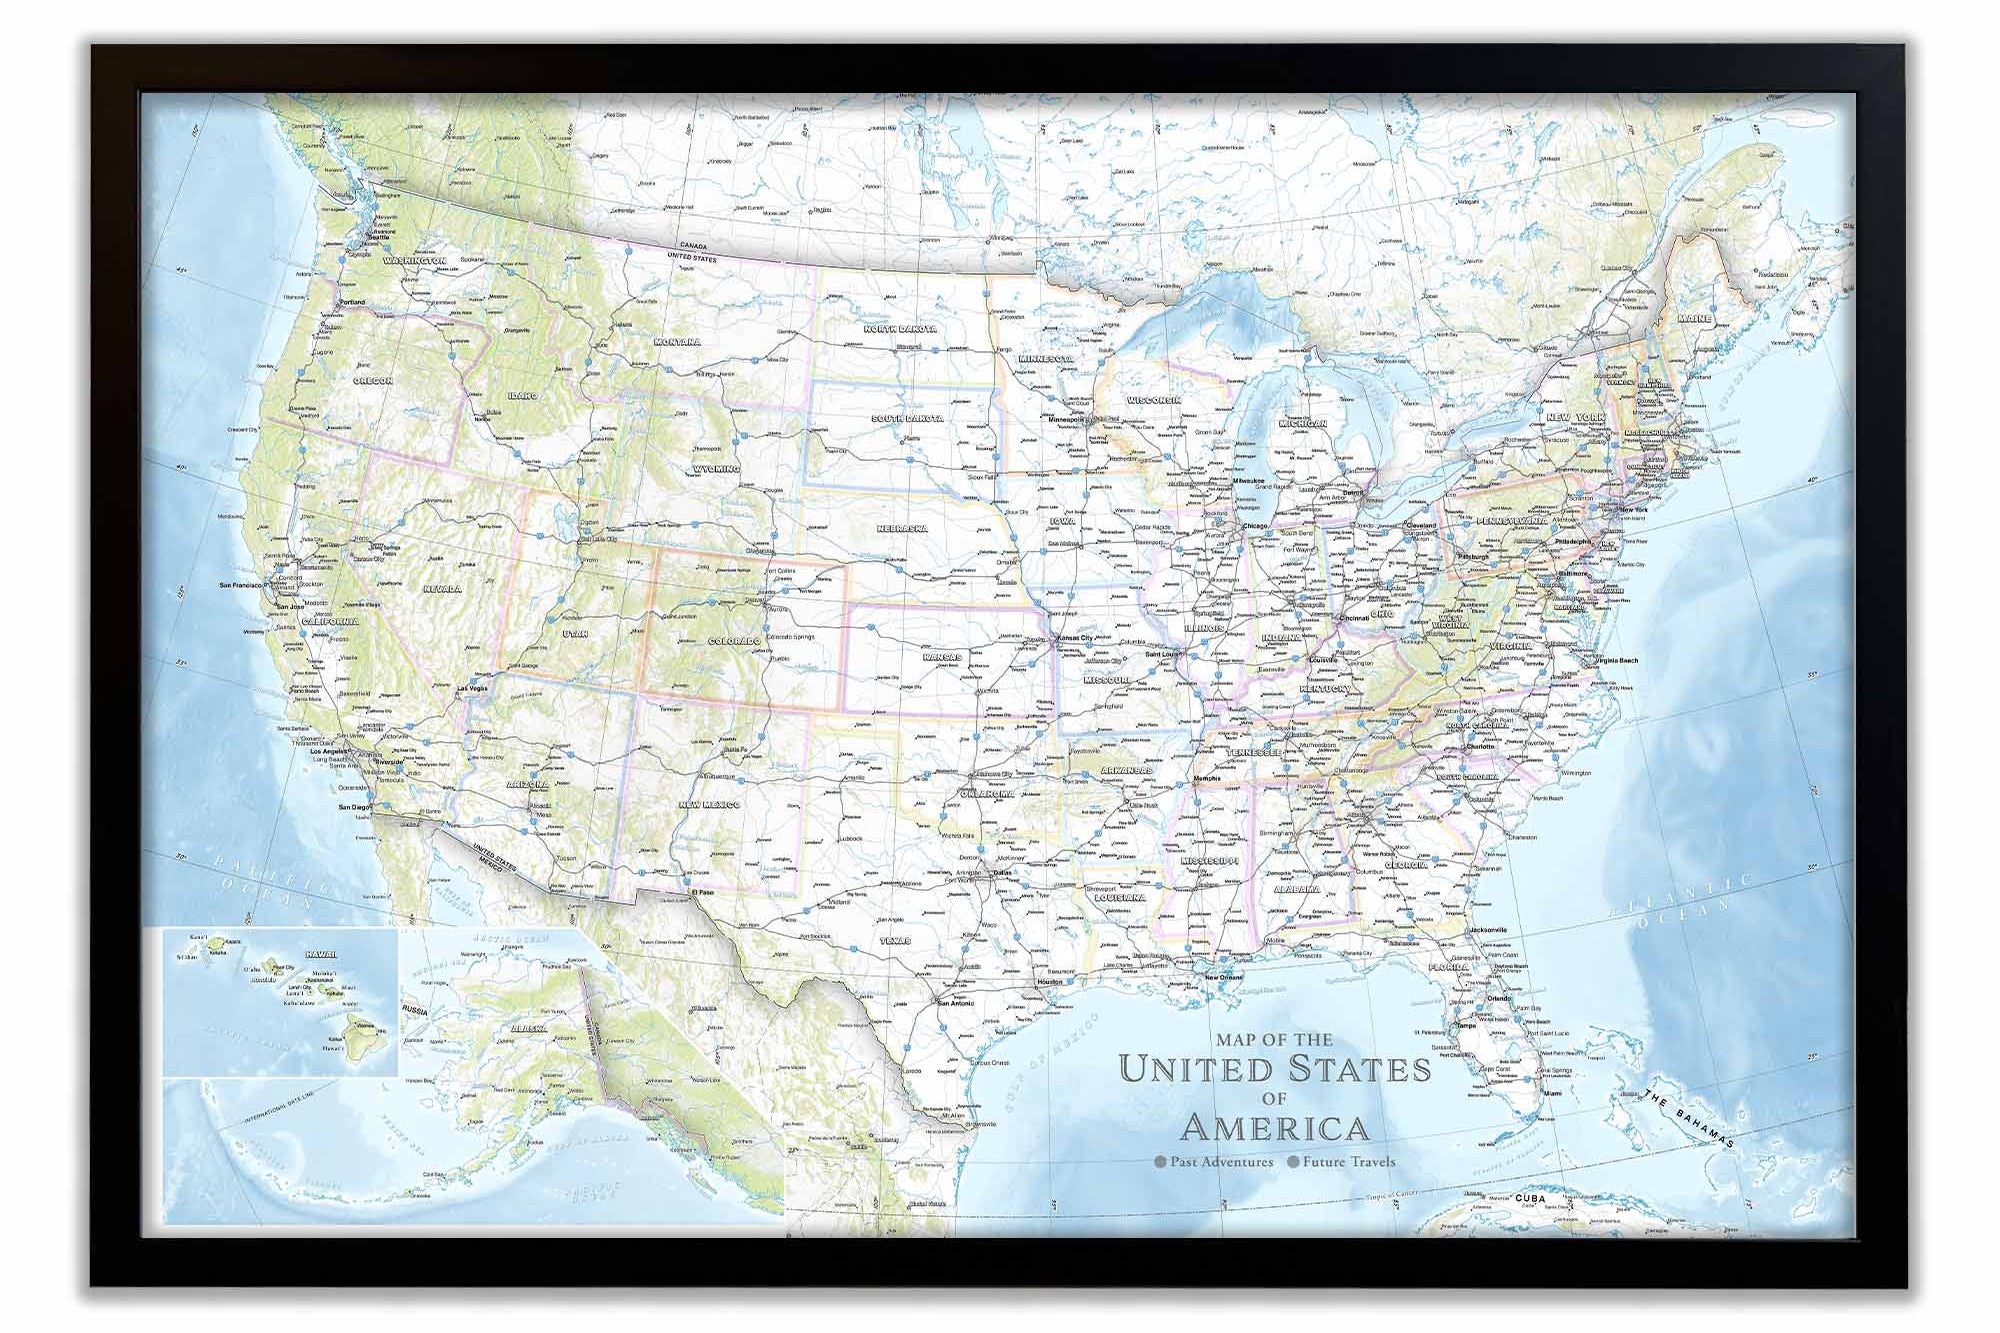 US Map with states and cities, includes pins to track your travels